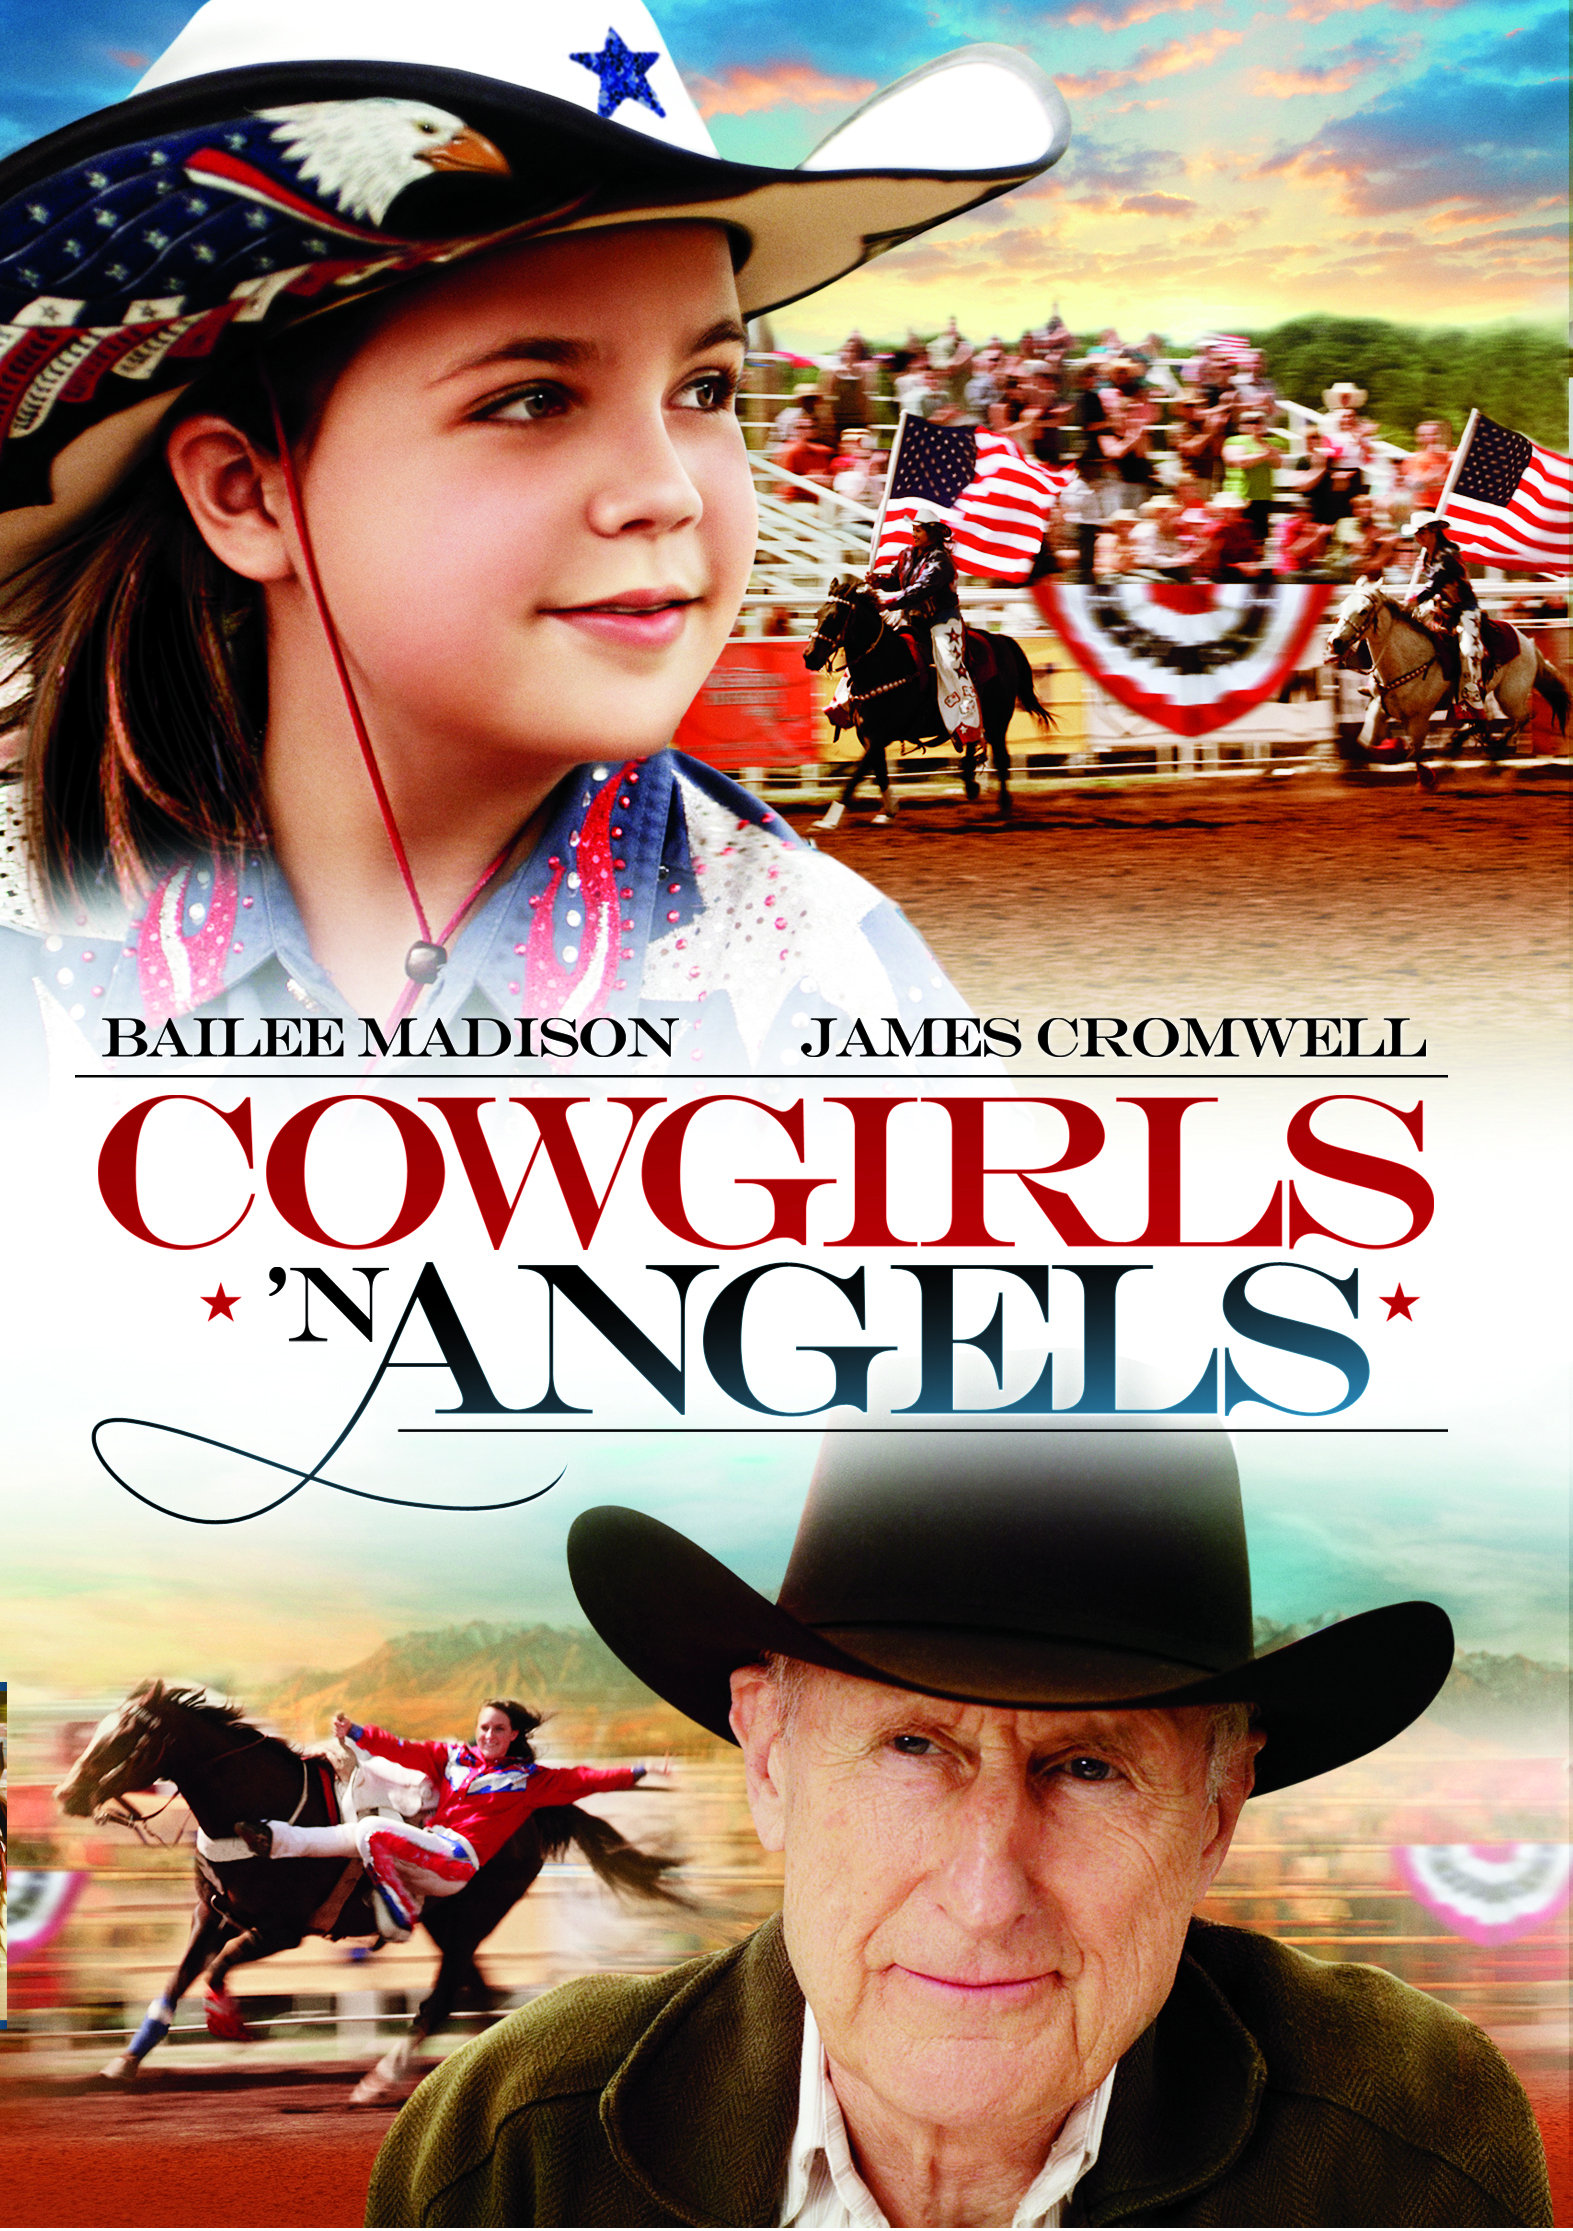 Cowgirls 'n Angels (2012) starring Bailee Madison on DVD on DVD